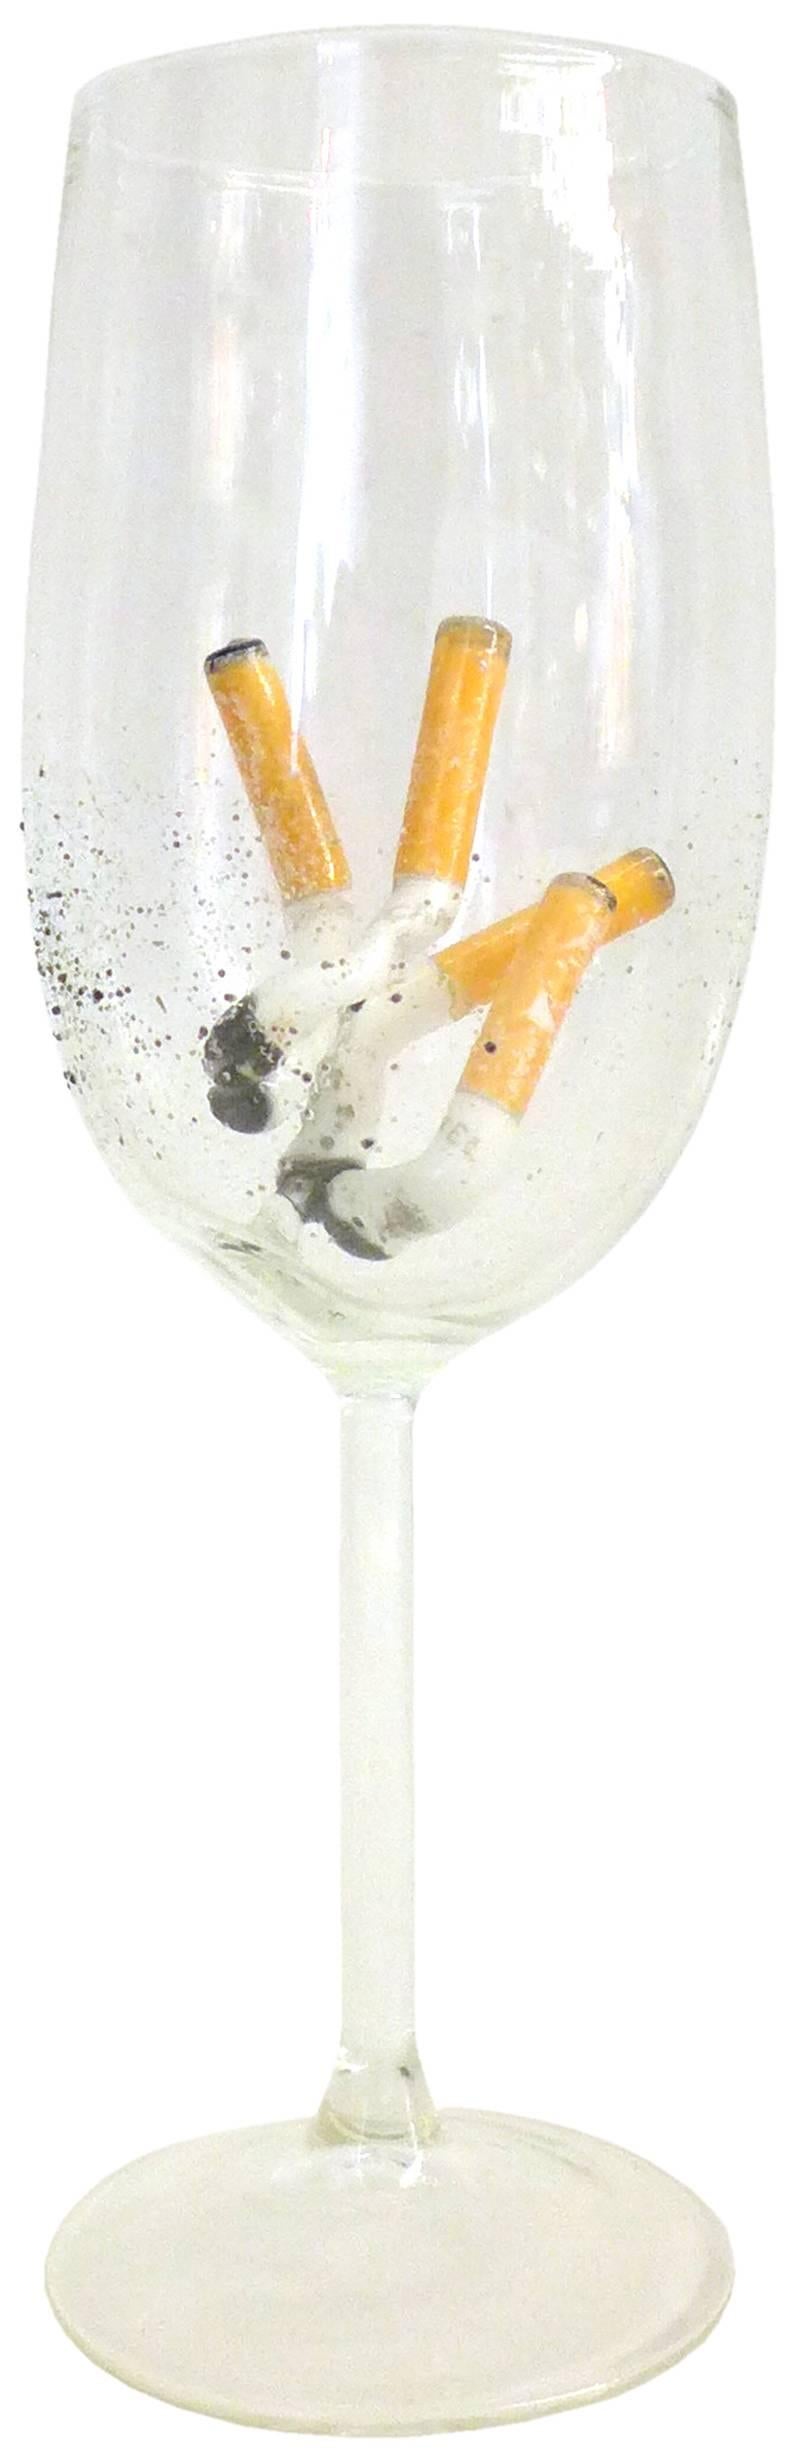 The bottom of the butt tastes better after wine (2015).
Horan’s blown glass-cigarette filled drinking vessels conceptually run parallel to previous sculptural works exploring the juxtaposition of beauty and the abject. Interested in a trompe l’oeil